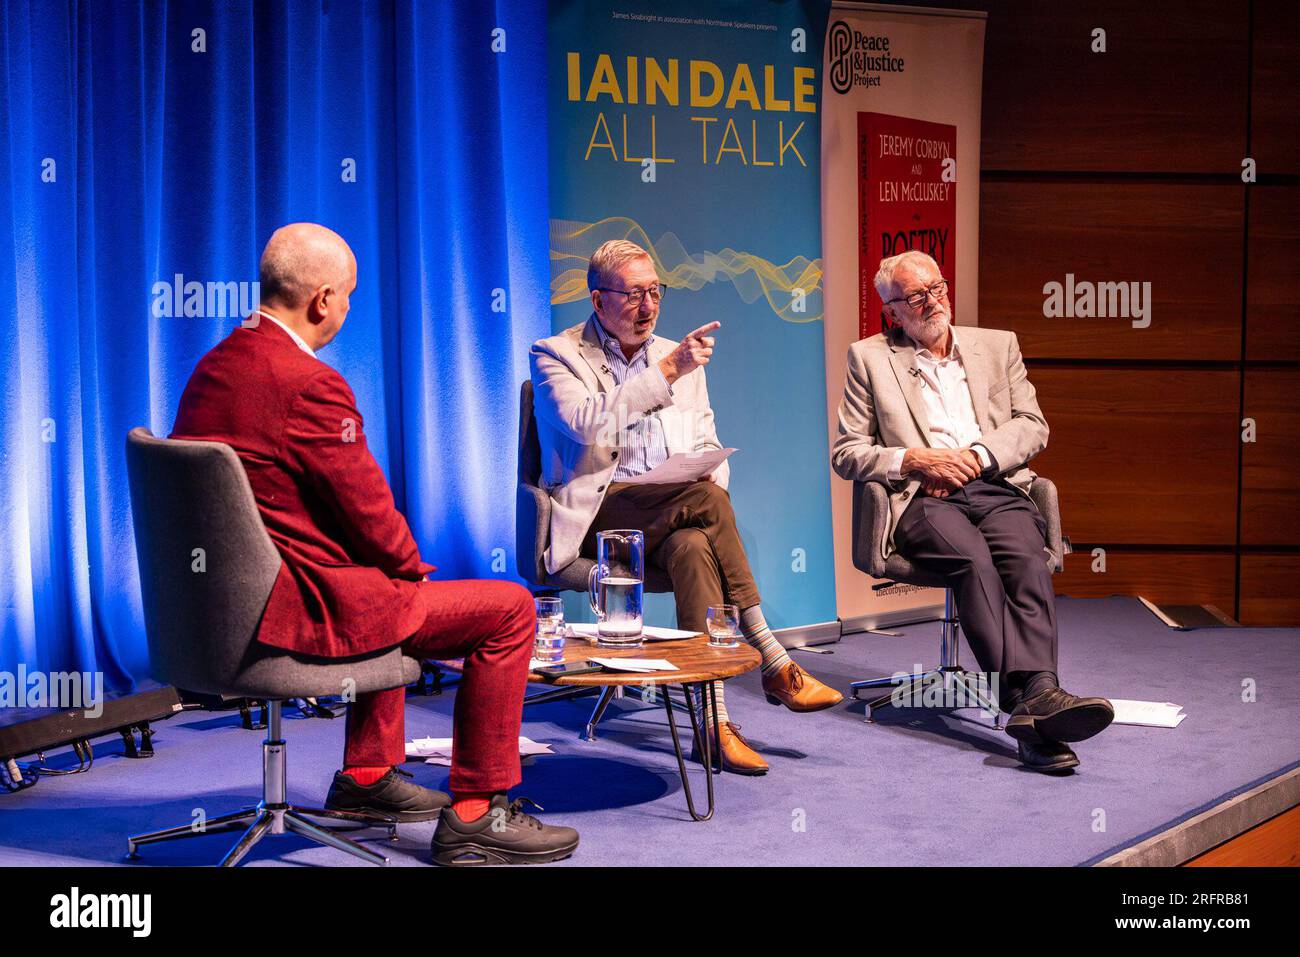 Edinburgh, United Kingdom. 05 August, 2023 Pictured: Iain Dale, LenMcCluskey and Jeremy Corbyn. Former Labour leader Jeremy Corbyn MP and renowned trade unionist Len McCluskey are interviewed by LBC presenter Iain Dale at the Edinburgh Fringe. During the interview McCluskey accused Keir Starmer of reneging on an agreement to retain Corbyn in the Labour Party. Jeremy Corbyn was quizzed if he will stand as an independent candidate in his constituency and responded by saying ‘watch this space’. Credit: Rich Dyson/Alamy Live News Stock Photo